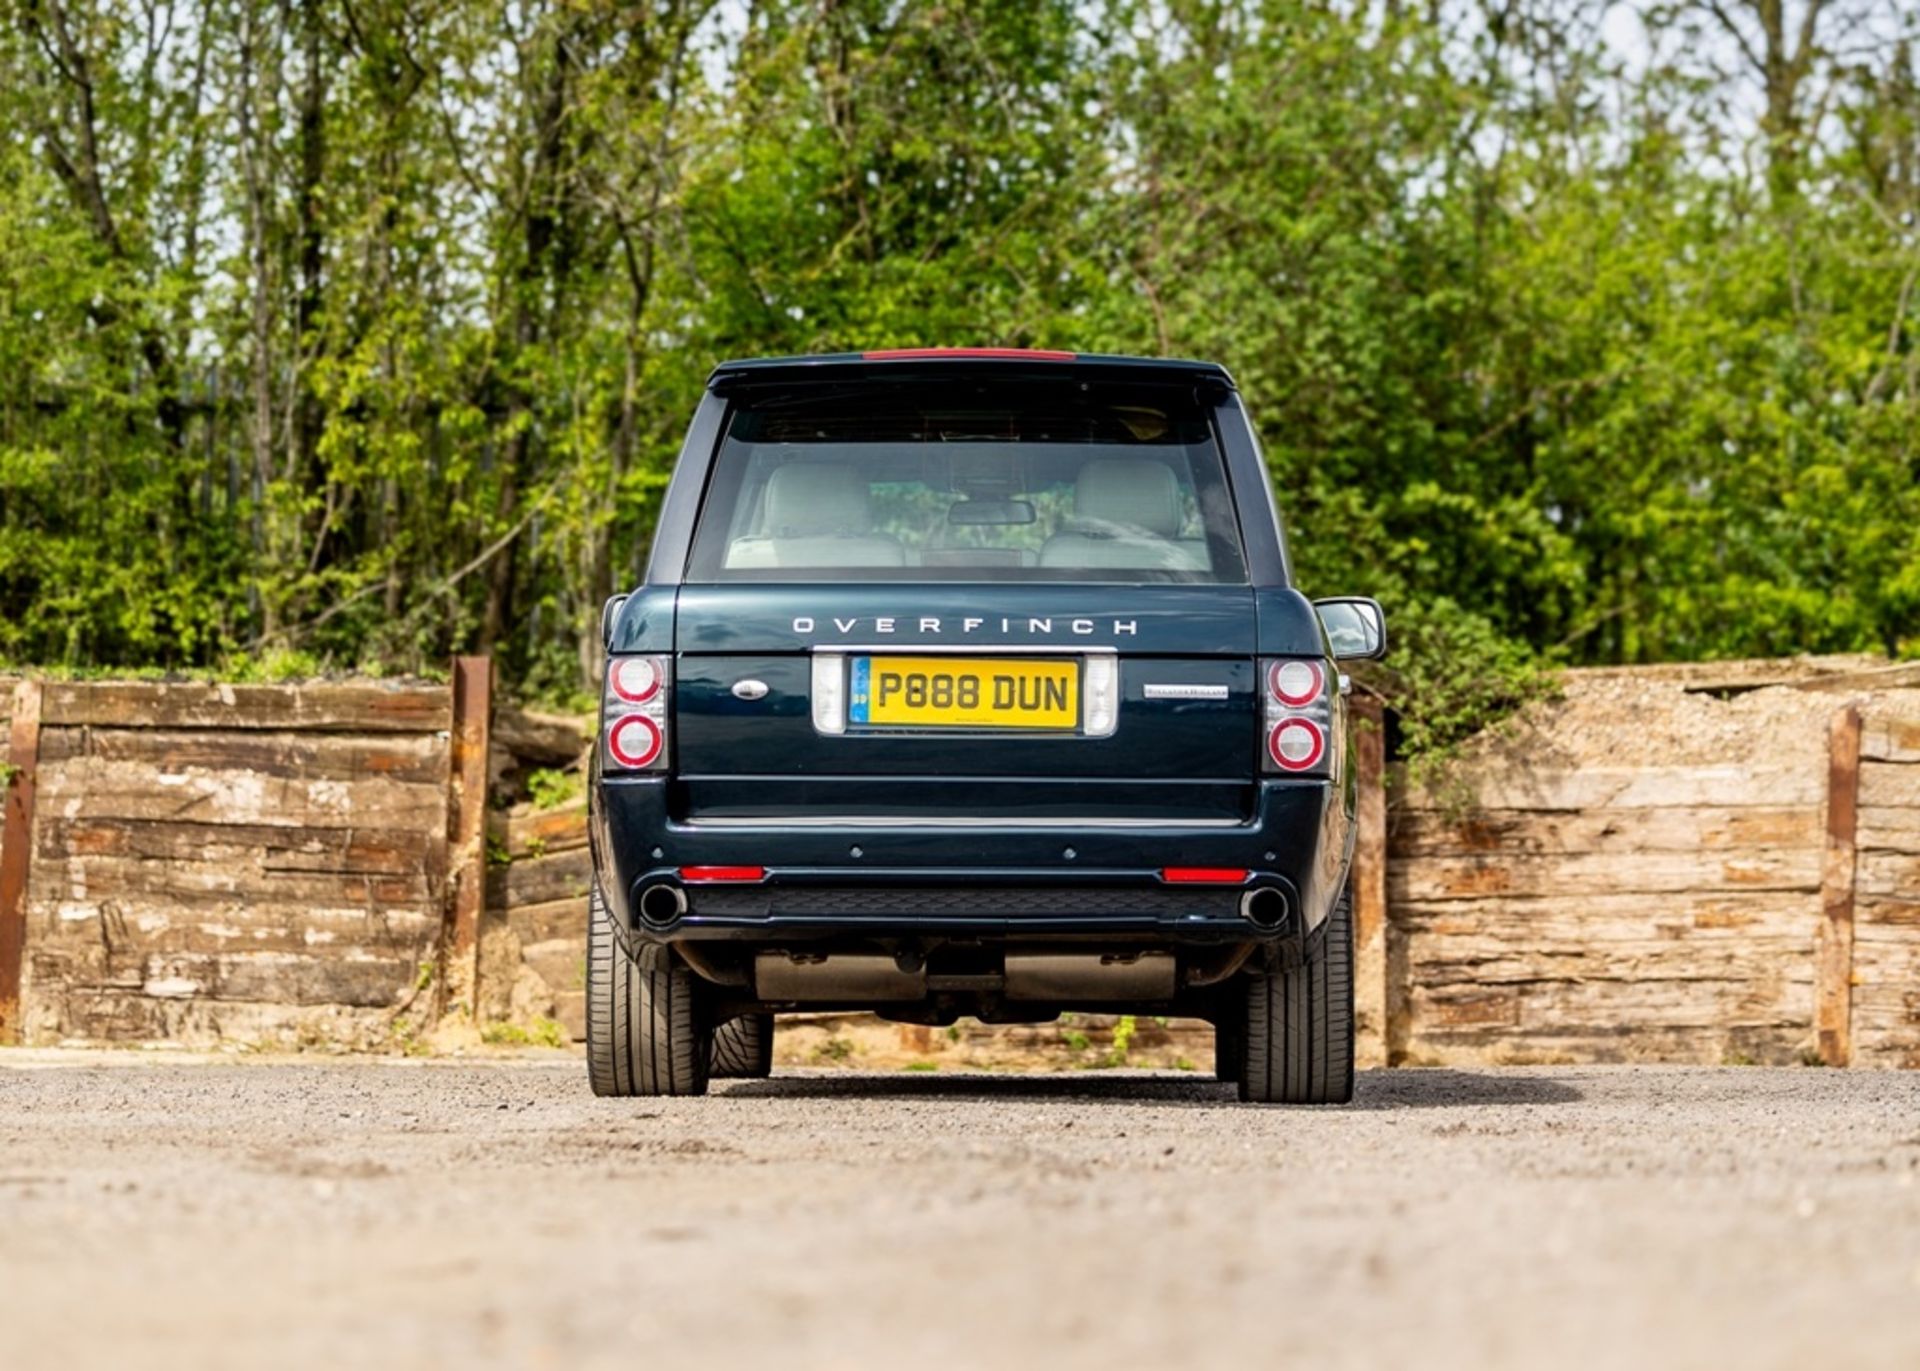 2009 Range Rover L322 Holland & Holland 5.0 Supercharged - Image 40 of 40